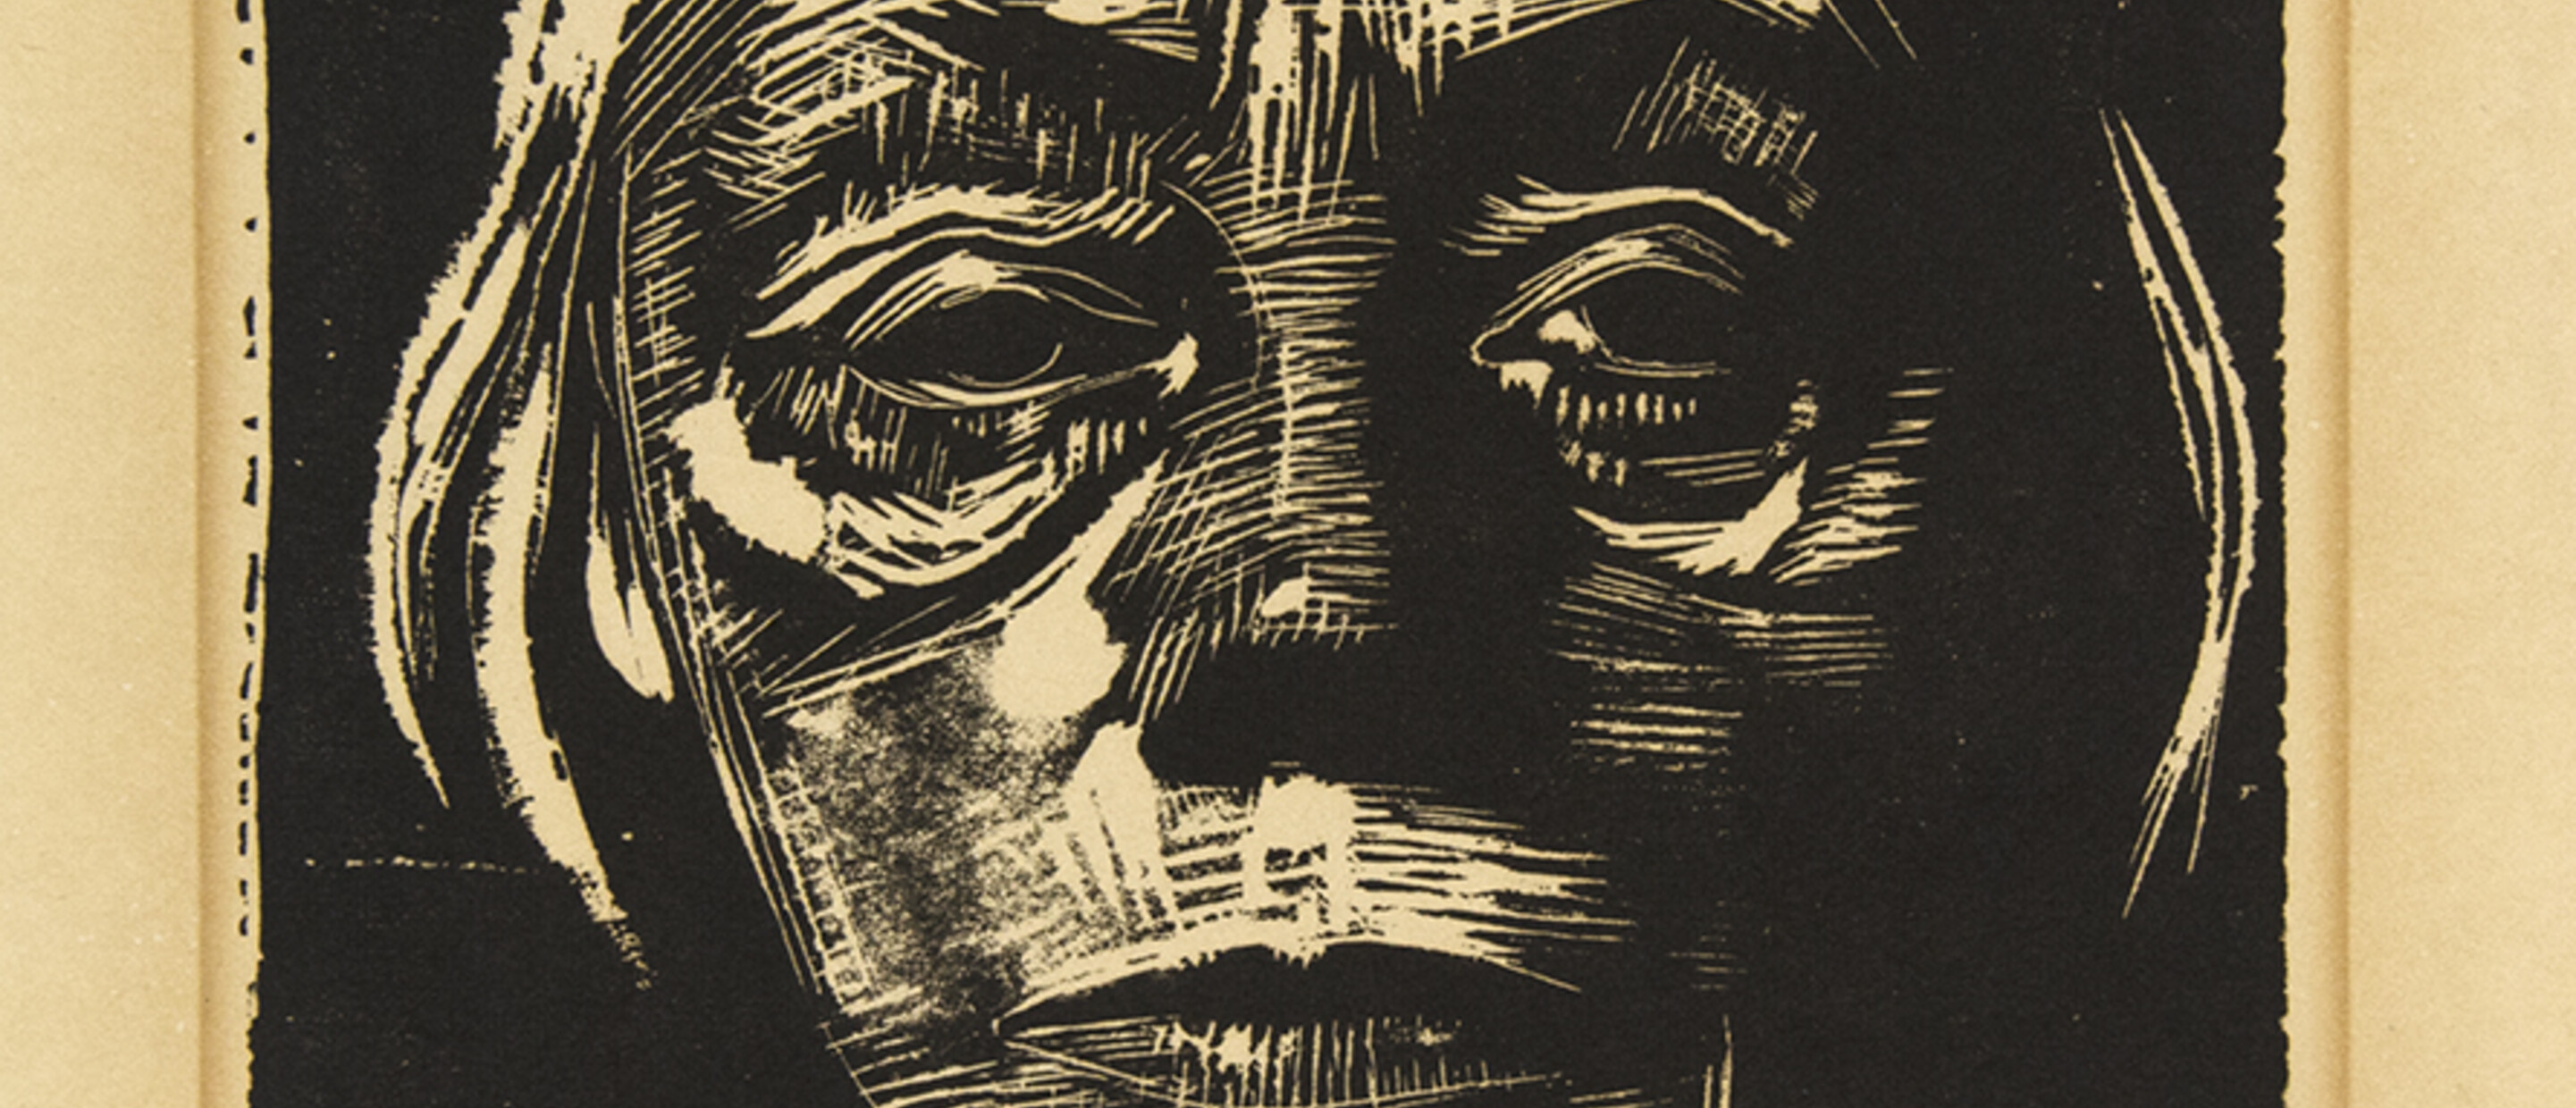 Käthe Kollwitz, Self-Portrait, 1923, 5 7/8 x 6 1/8 in. Woodcut on paper. Pomona College Collection. Gift of the Culley Collection